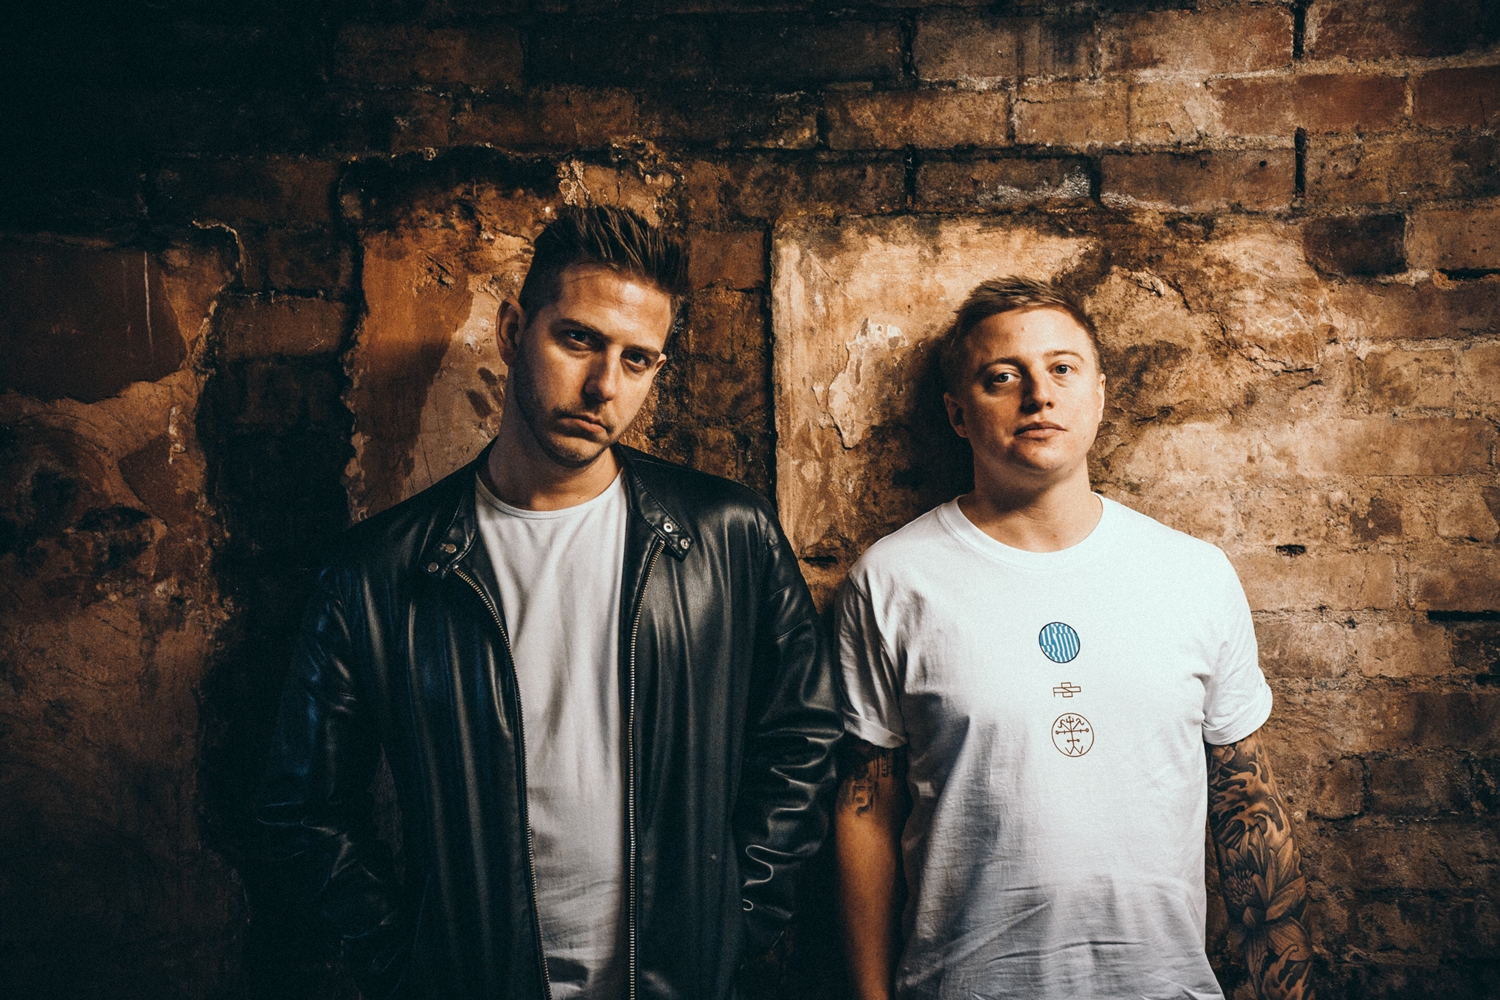 Spektre drop thundering techno EP “Stop Me From Falling”